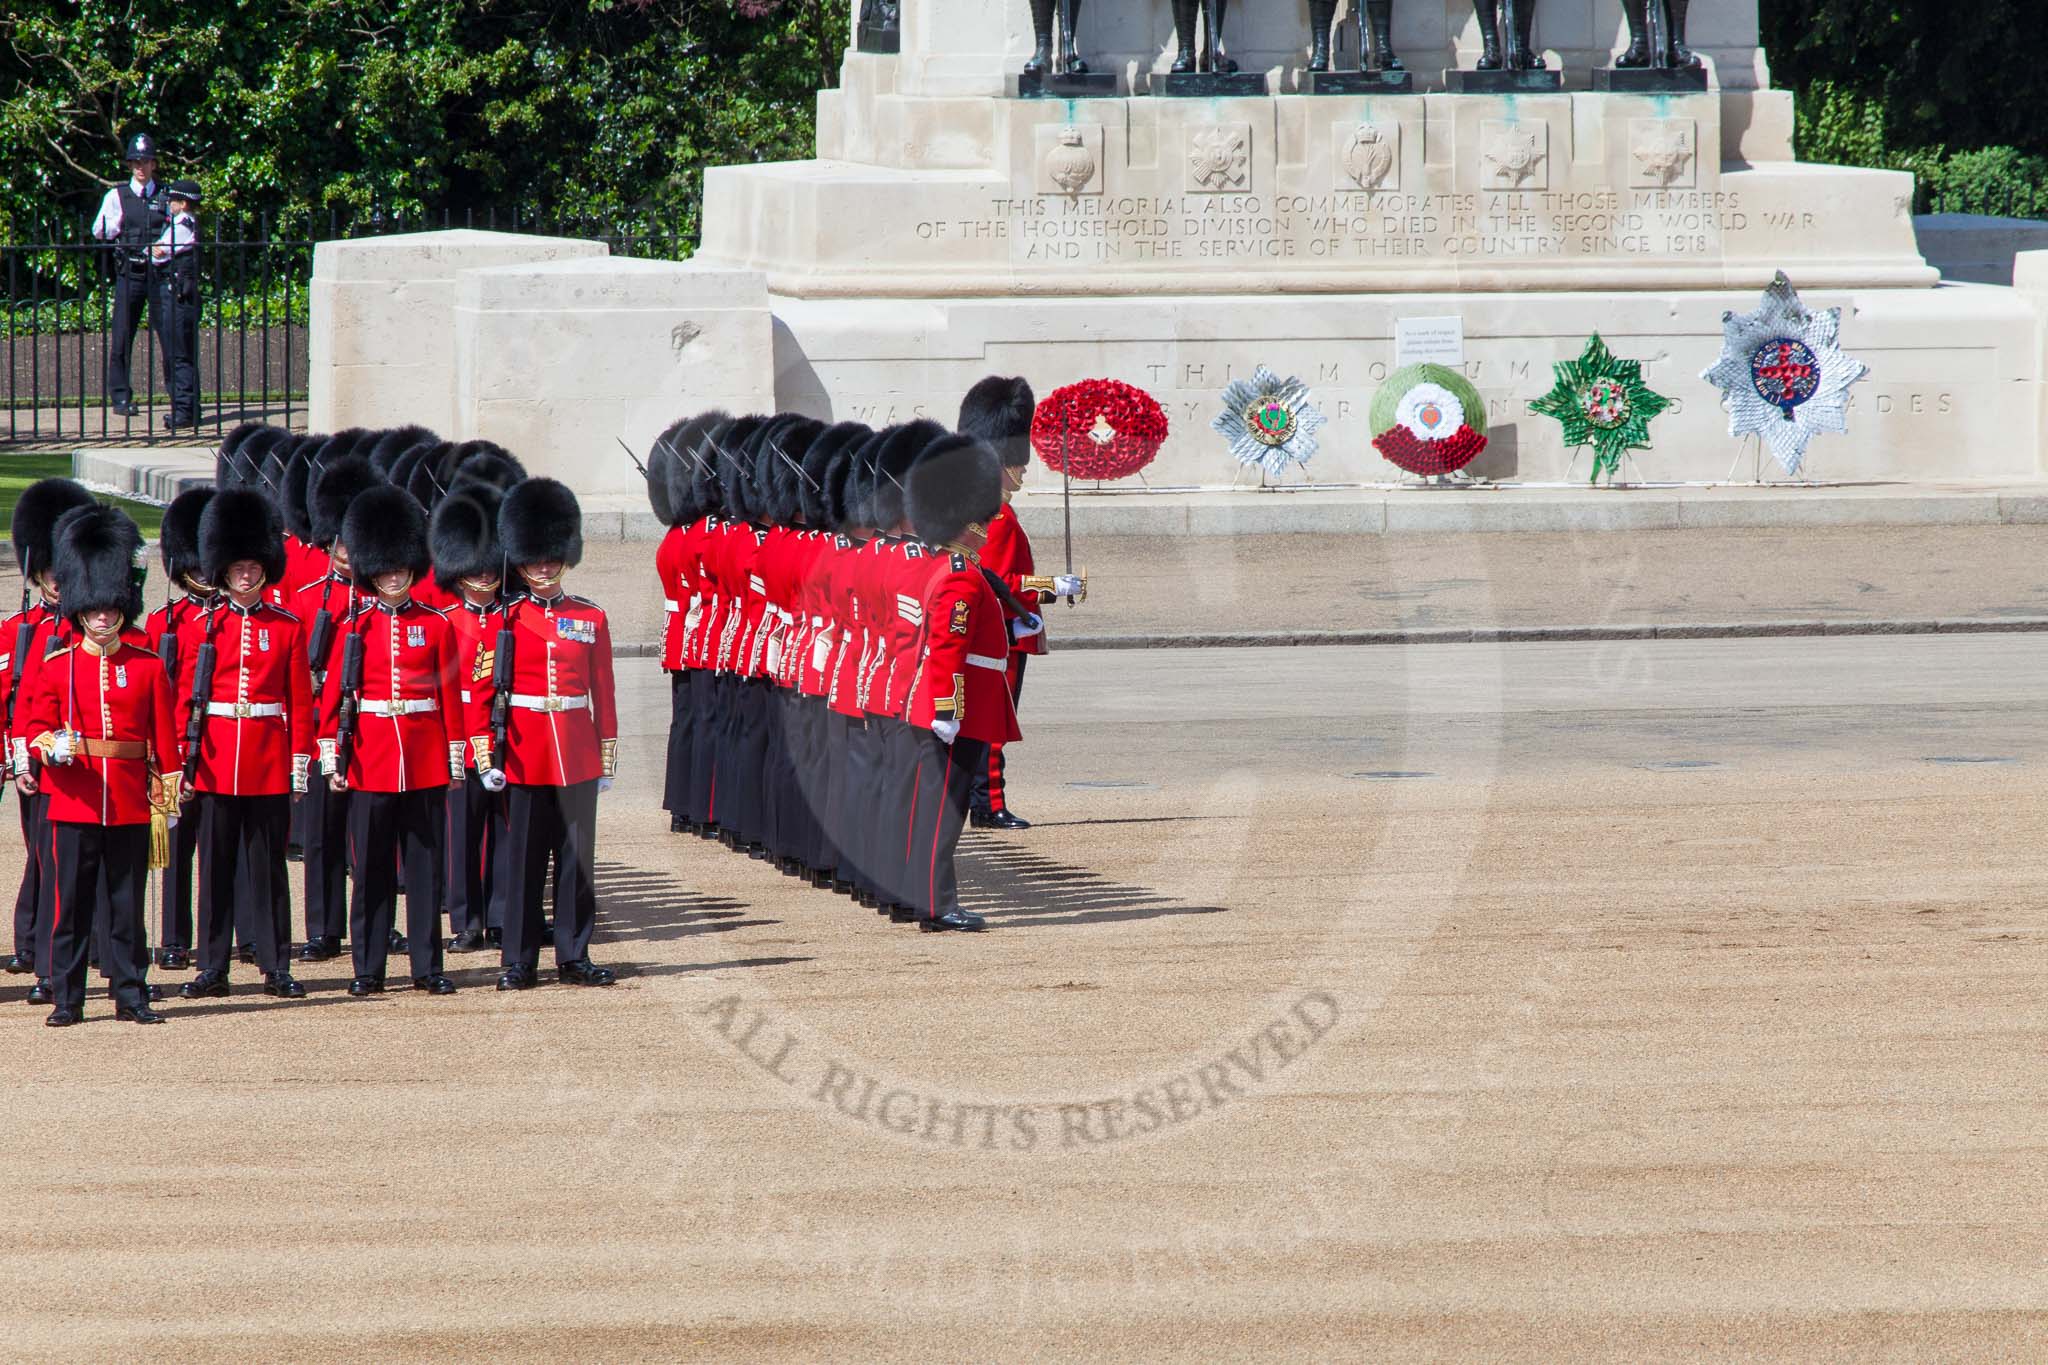 The Colonel's Review 2013: No. 3 Guard, 1st Battalion Welsh Guards, at the gap in the line for members of the Royal Family..
Horse Guards Parade, Westminster,
London SW1,

United Kingdom,
on 08 June 2013 at 10:45, image #211